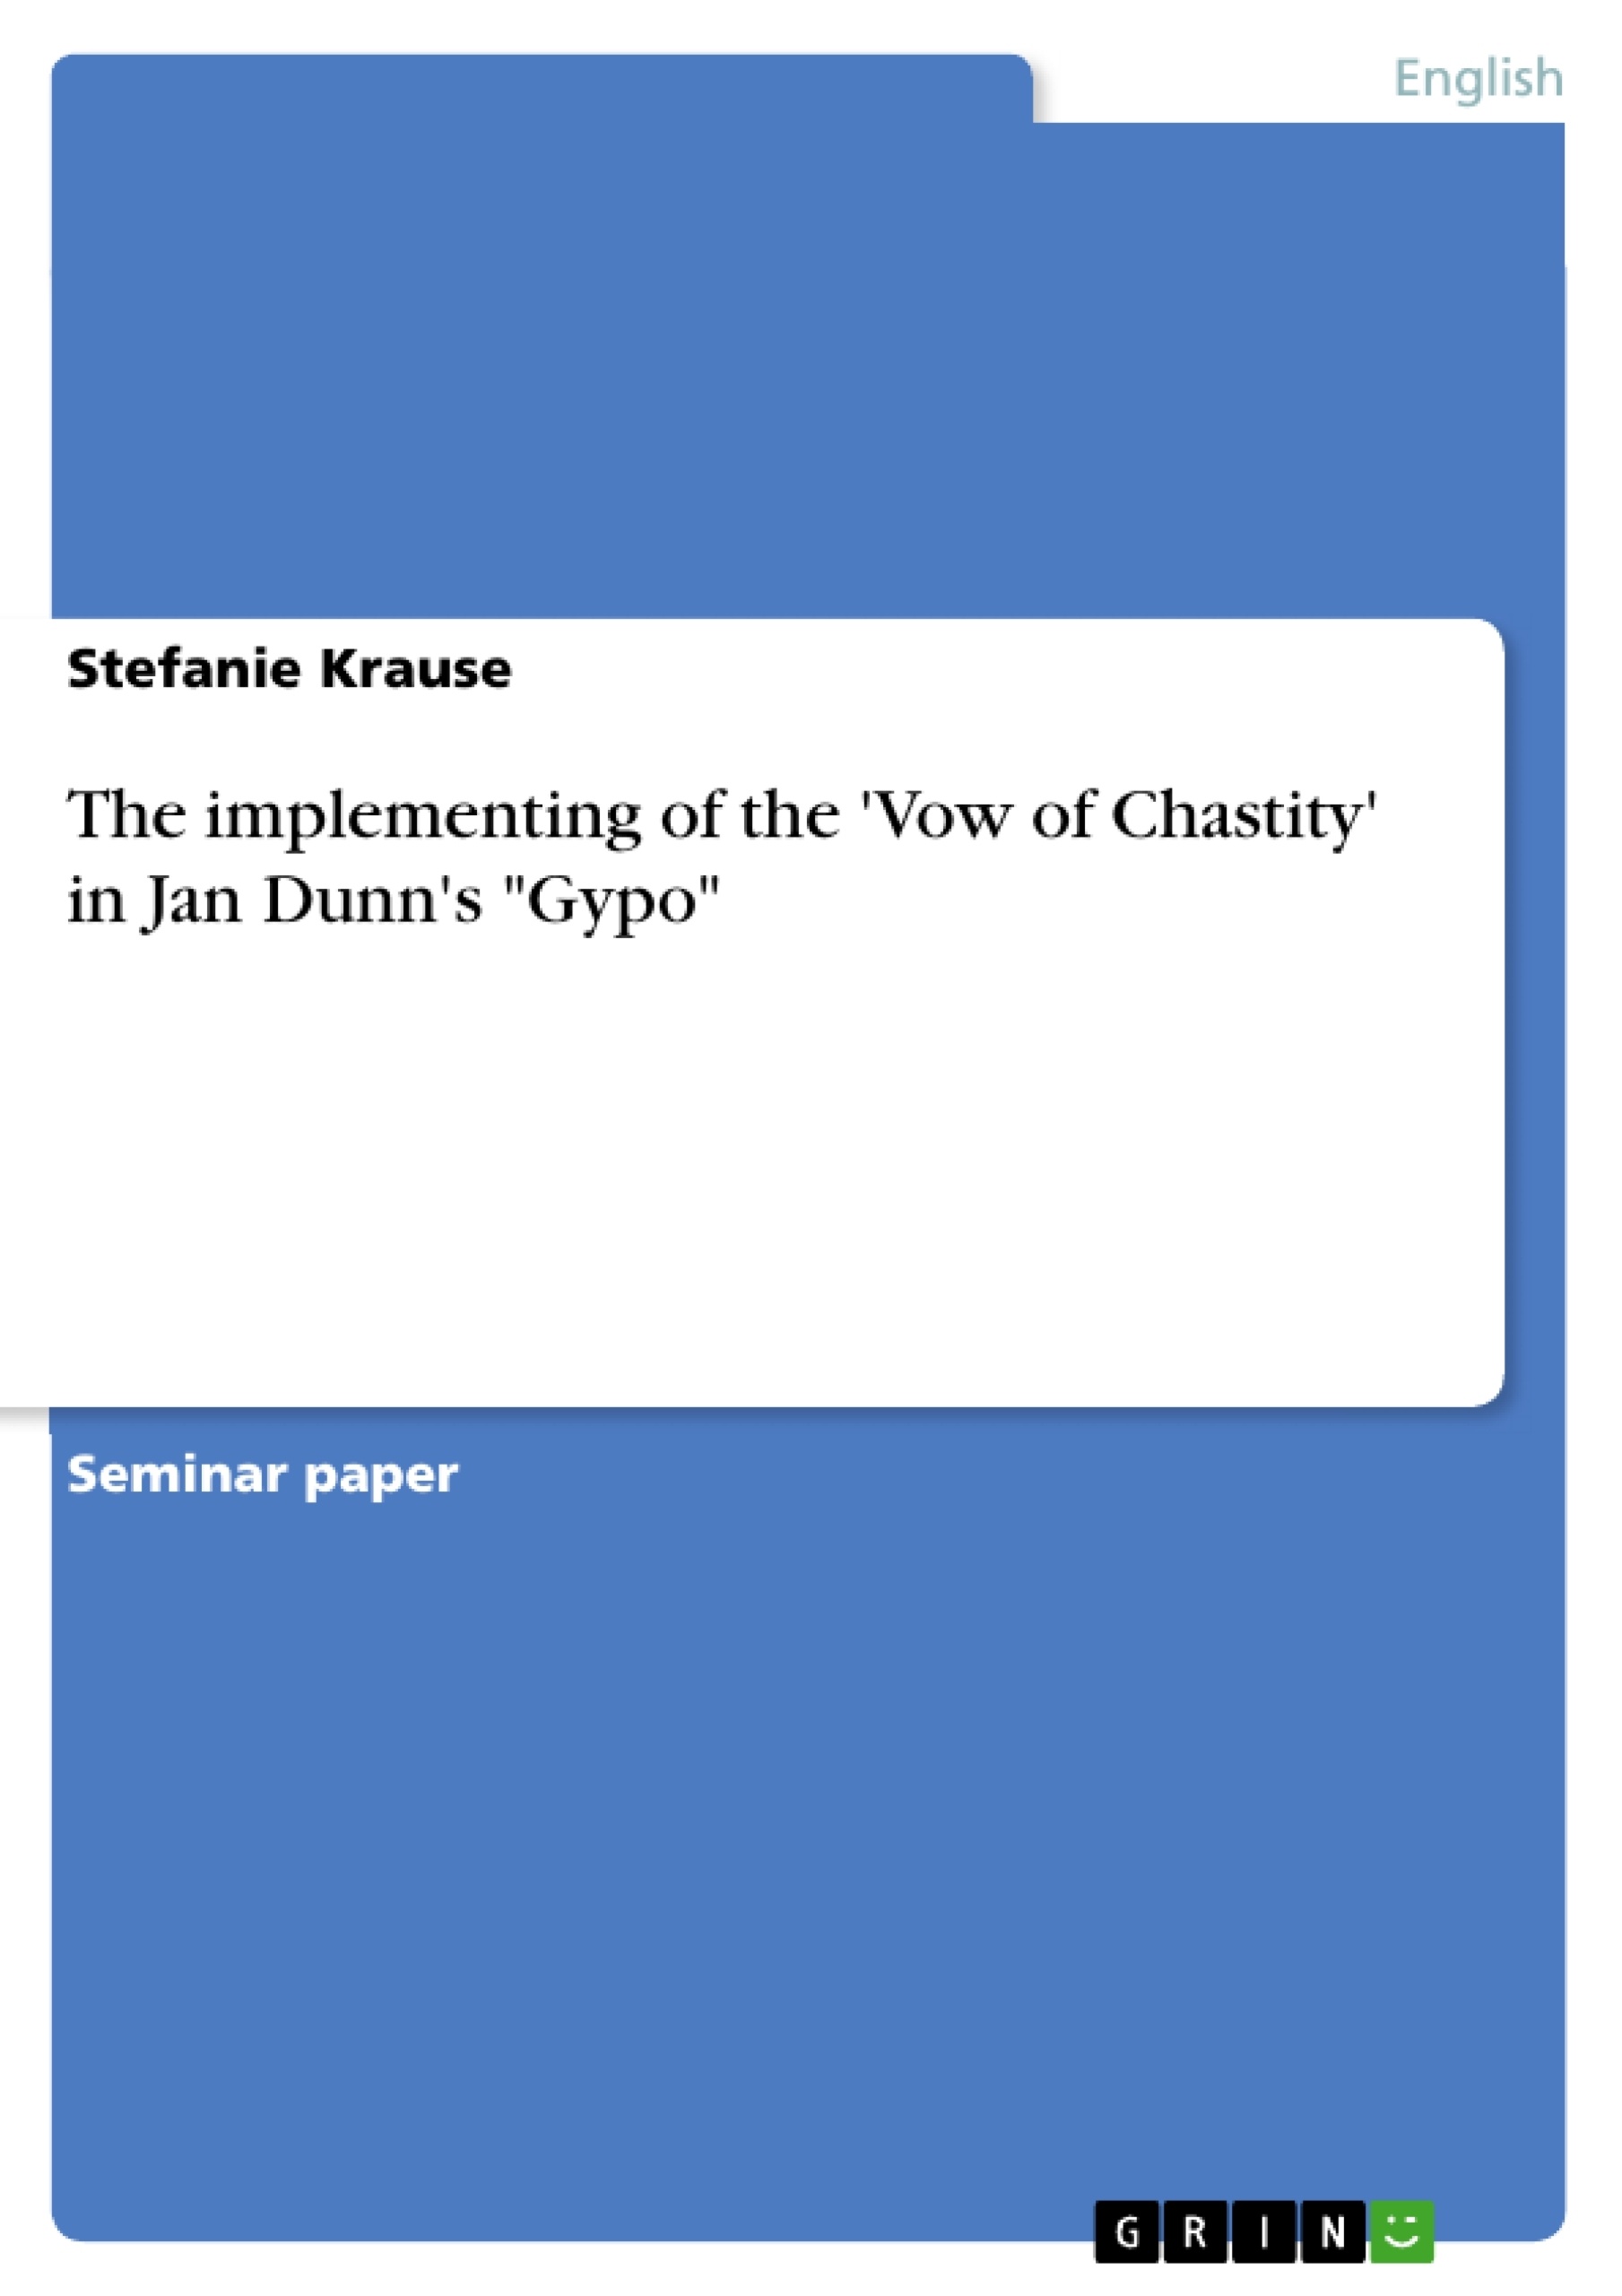 Title: The implementing of the 'Vow of Chastity' in Jan Dunn's "Gypo"